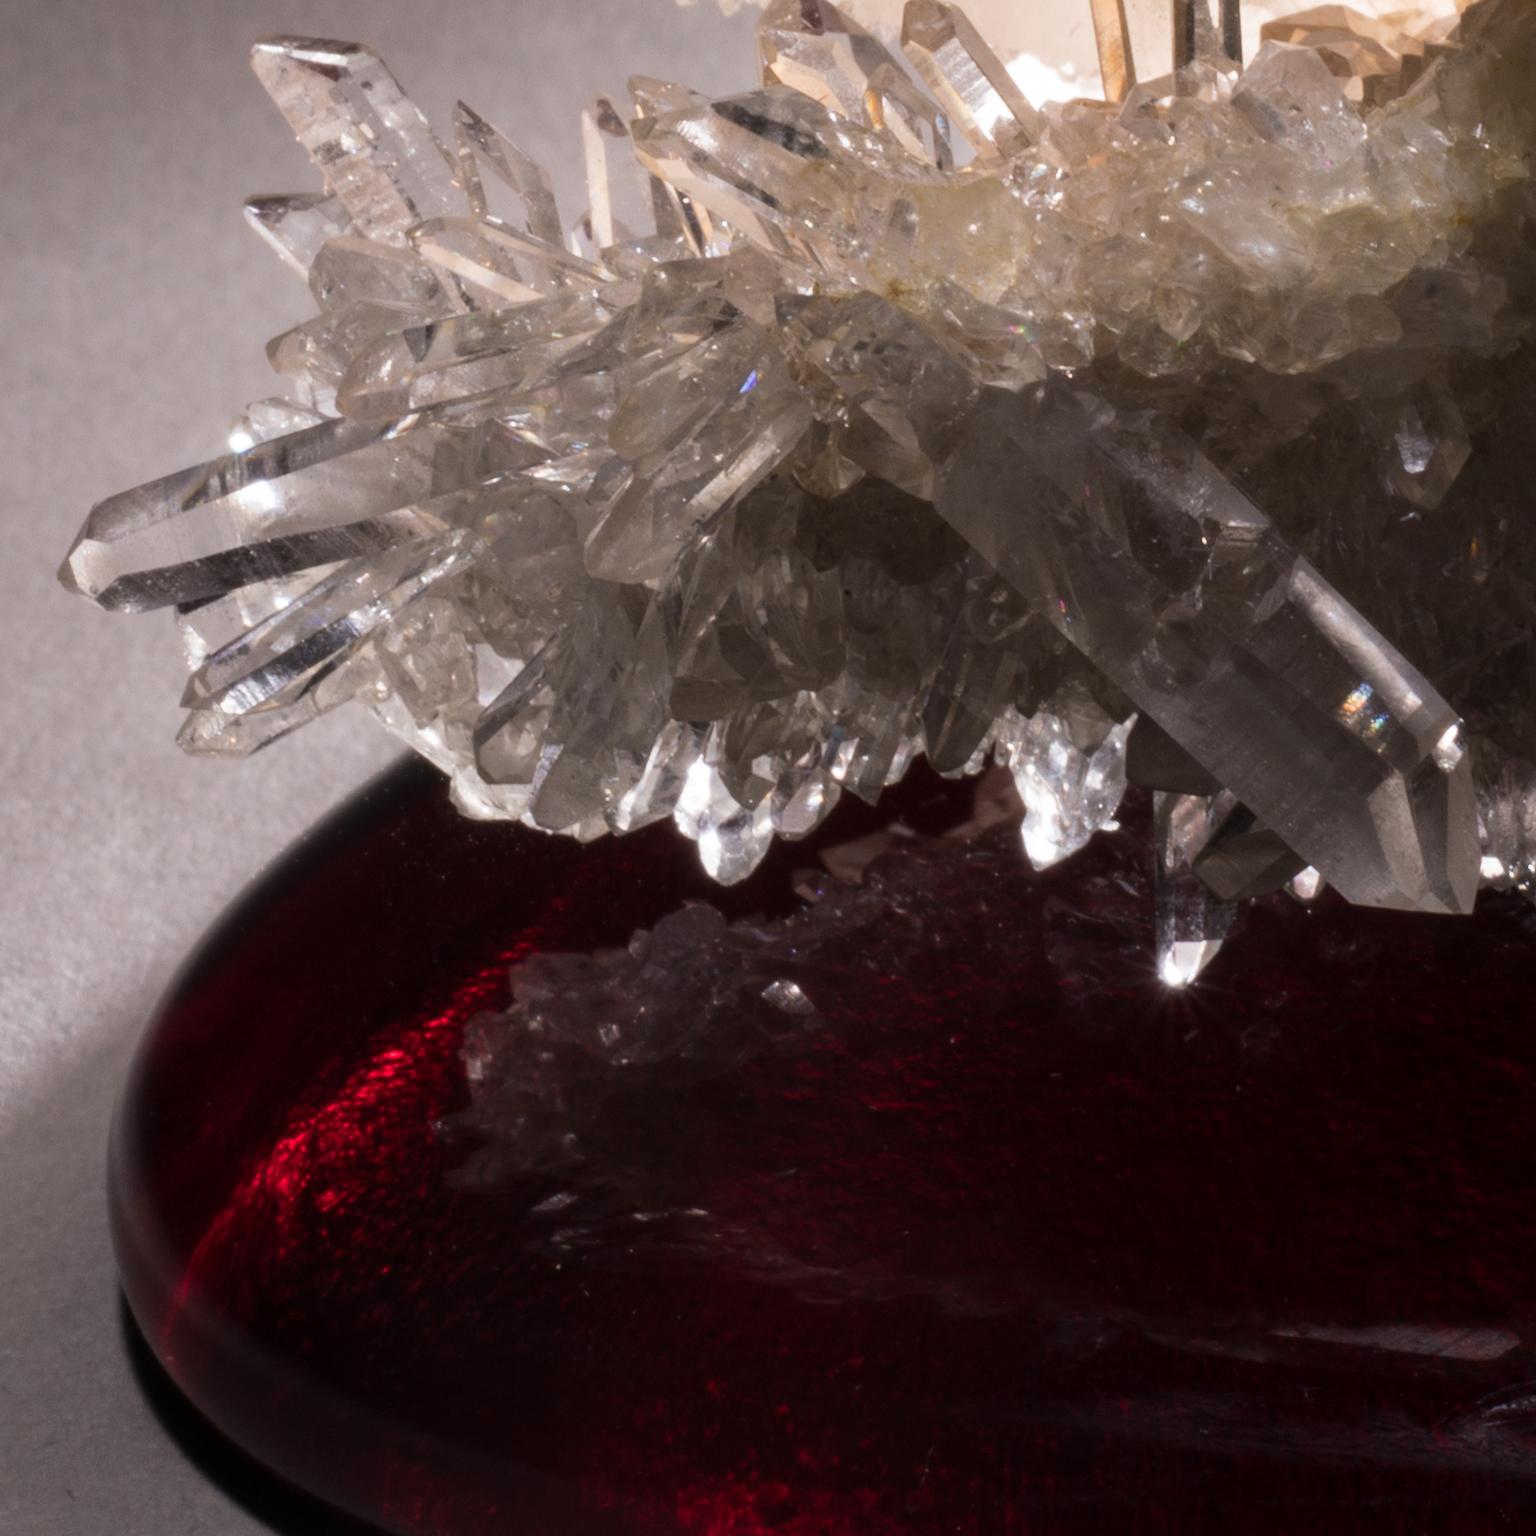 Himalayan quartz on cast glass

Himalayan quartz on cast glass is as dramatic as the remote mountains where this stunning quartz is found. The flowing ruby red base demands attention while subtly carrying the clear crystal points of this